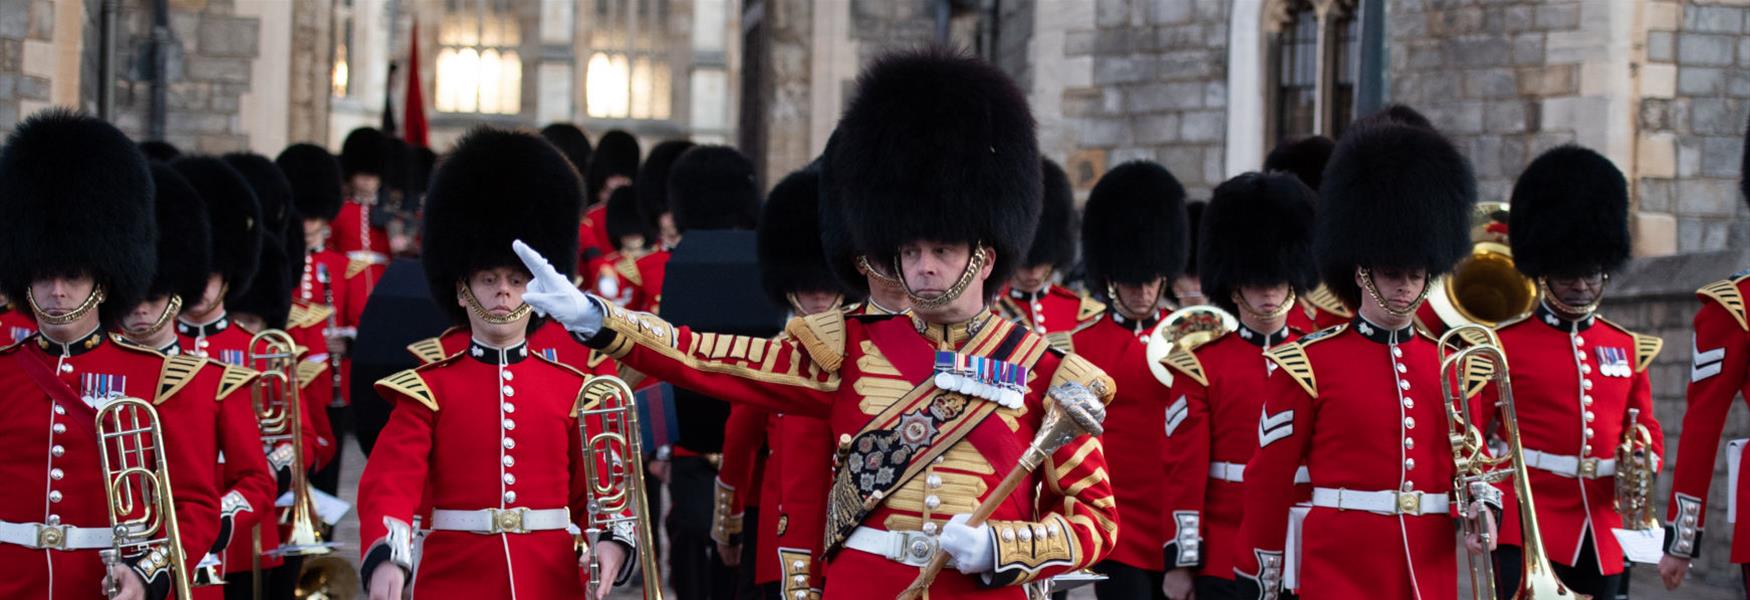 Windsor Castle Guards (copyright Gill Heppell)